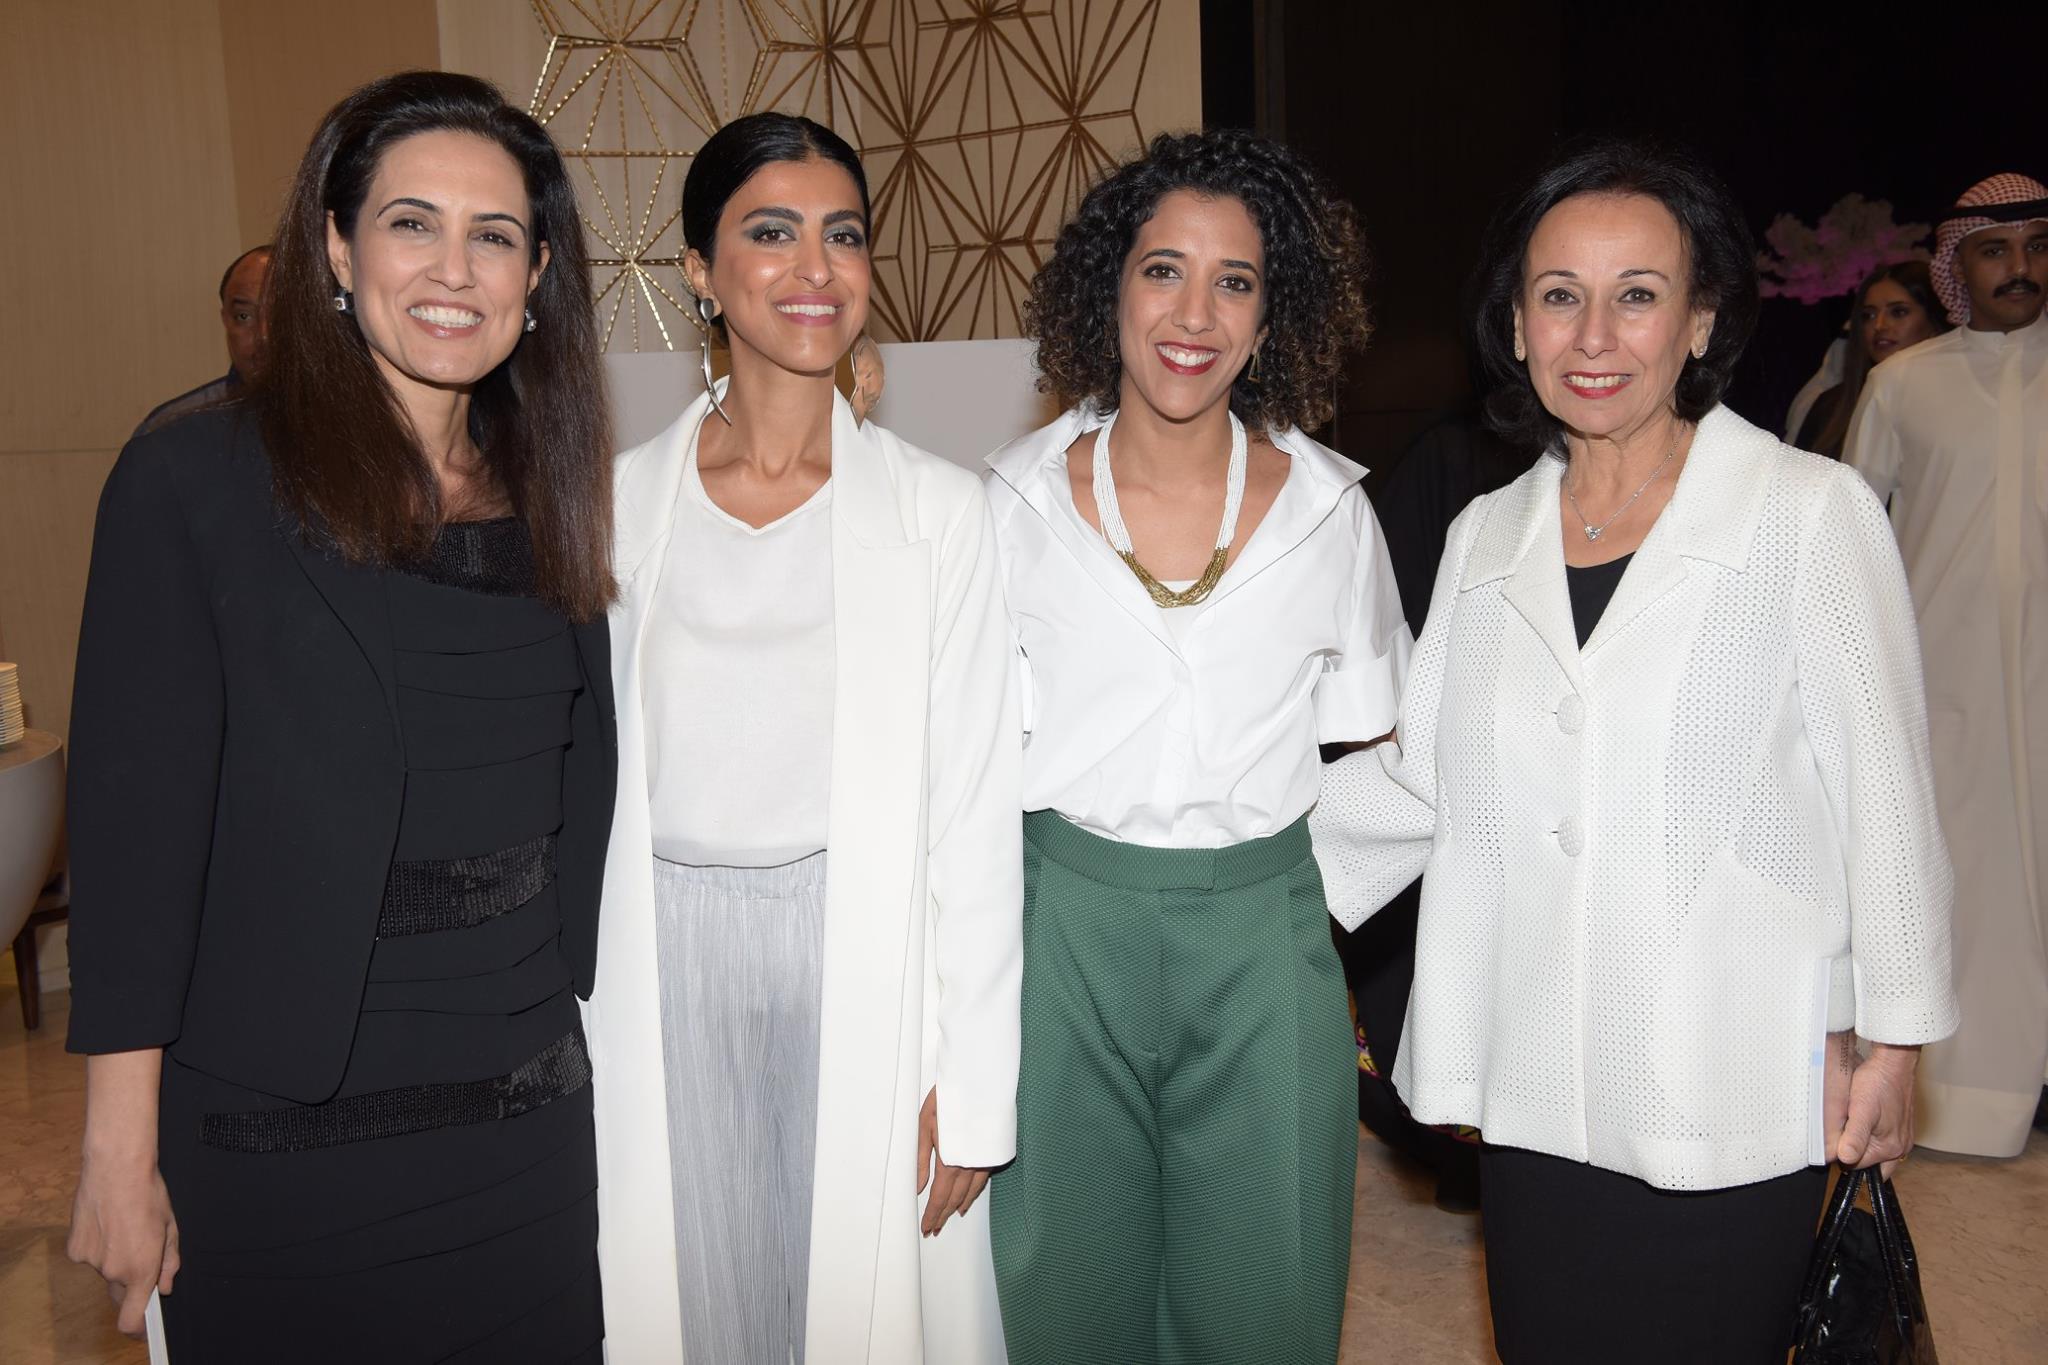 An evening full of happiness, inspiration and creativity with Rana Al-Khaled, Co-Founder Protégés, Sara Al Nafisi & Hussa Al Humaidhi, Cultural Developers NUQAT, Wafa Al-Qatami, Board Member Kuwait Chamber of Commerce & Industry (right) ©Those Who Inspire